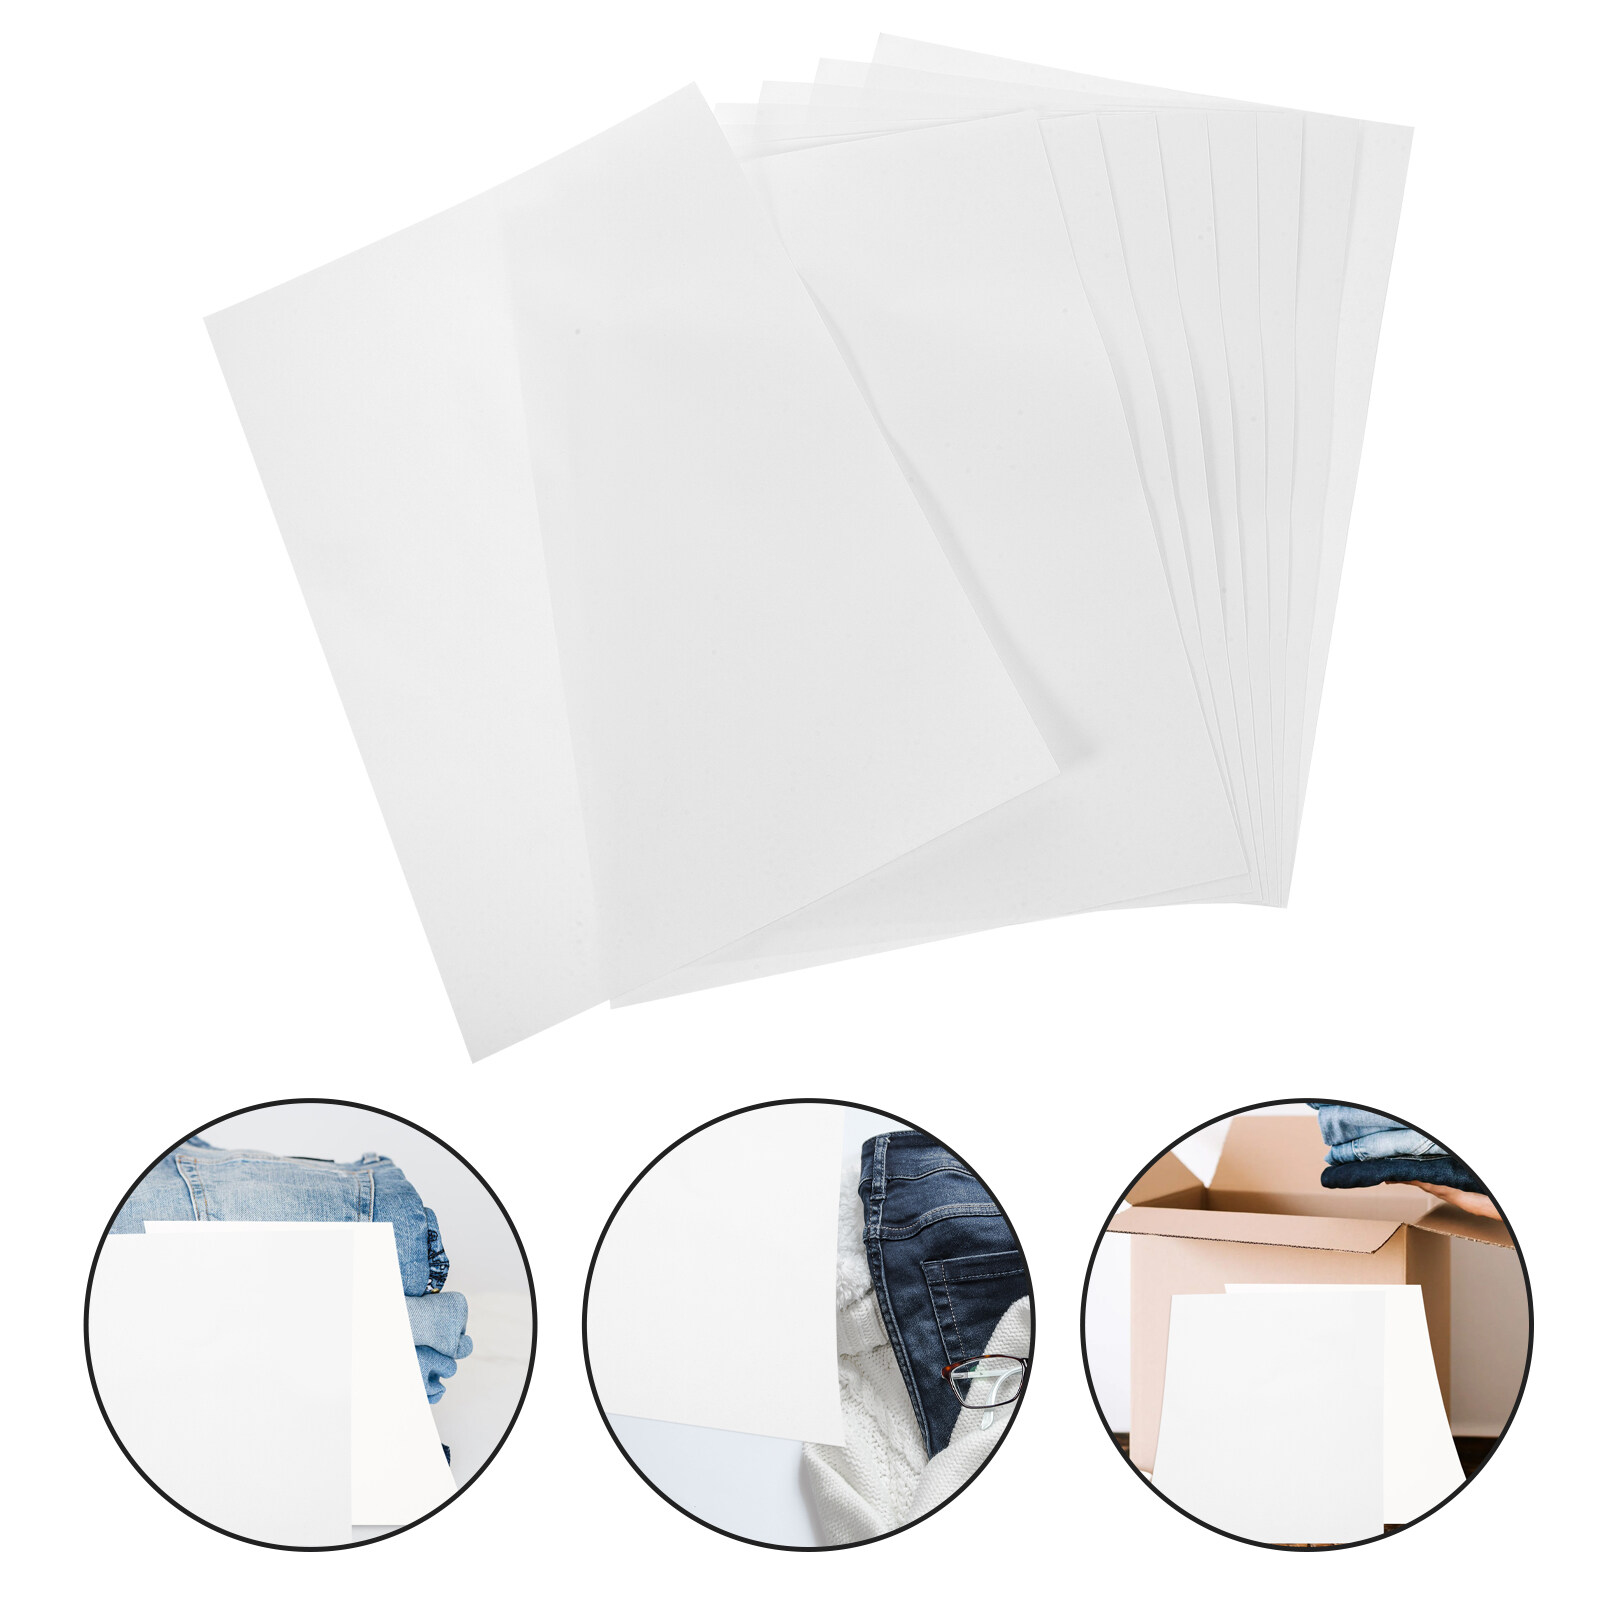 50 Sheets 4 Ply Tattoo Transfer Paper Spirit Master Stencil Carbon Thermal Tracing Copier Paper 0808